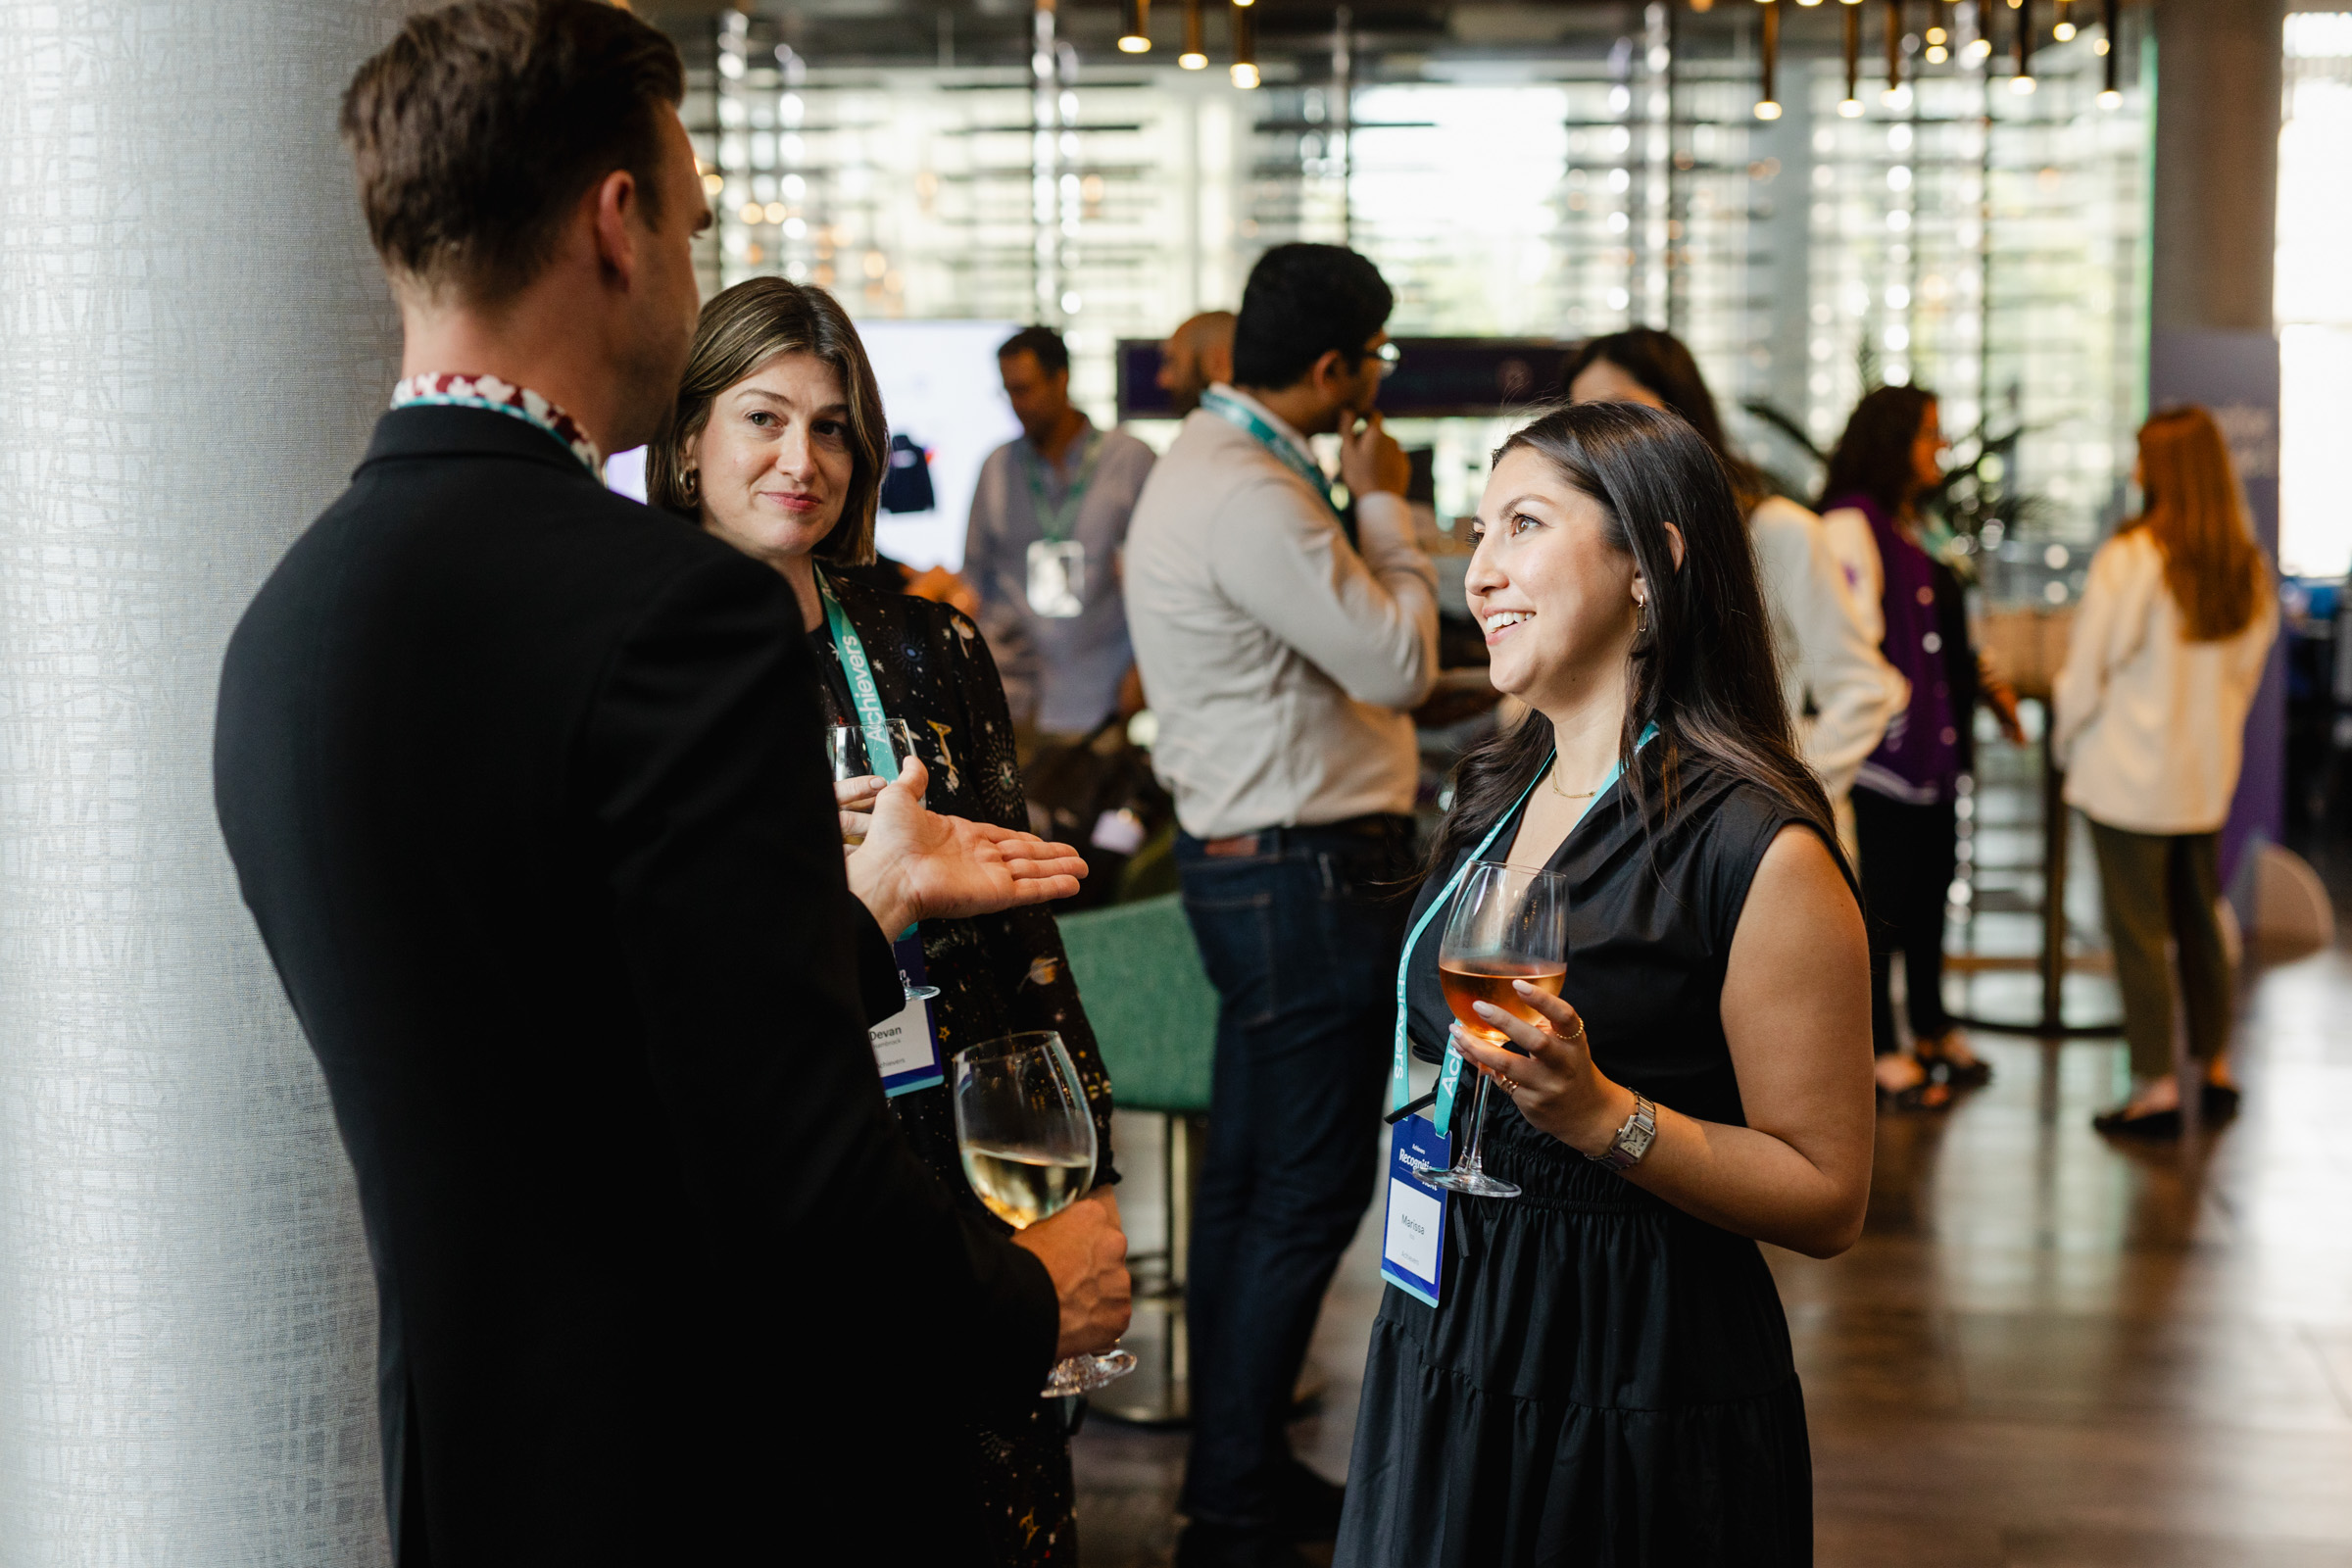 People engaged in conversation at a social event; some hold drinks while wearing name tags. The background features more attendees and a modern interior with large windows, perfectly capturing the essence of event photography.